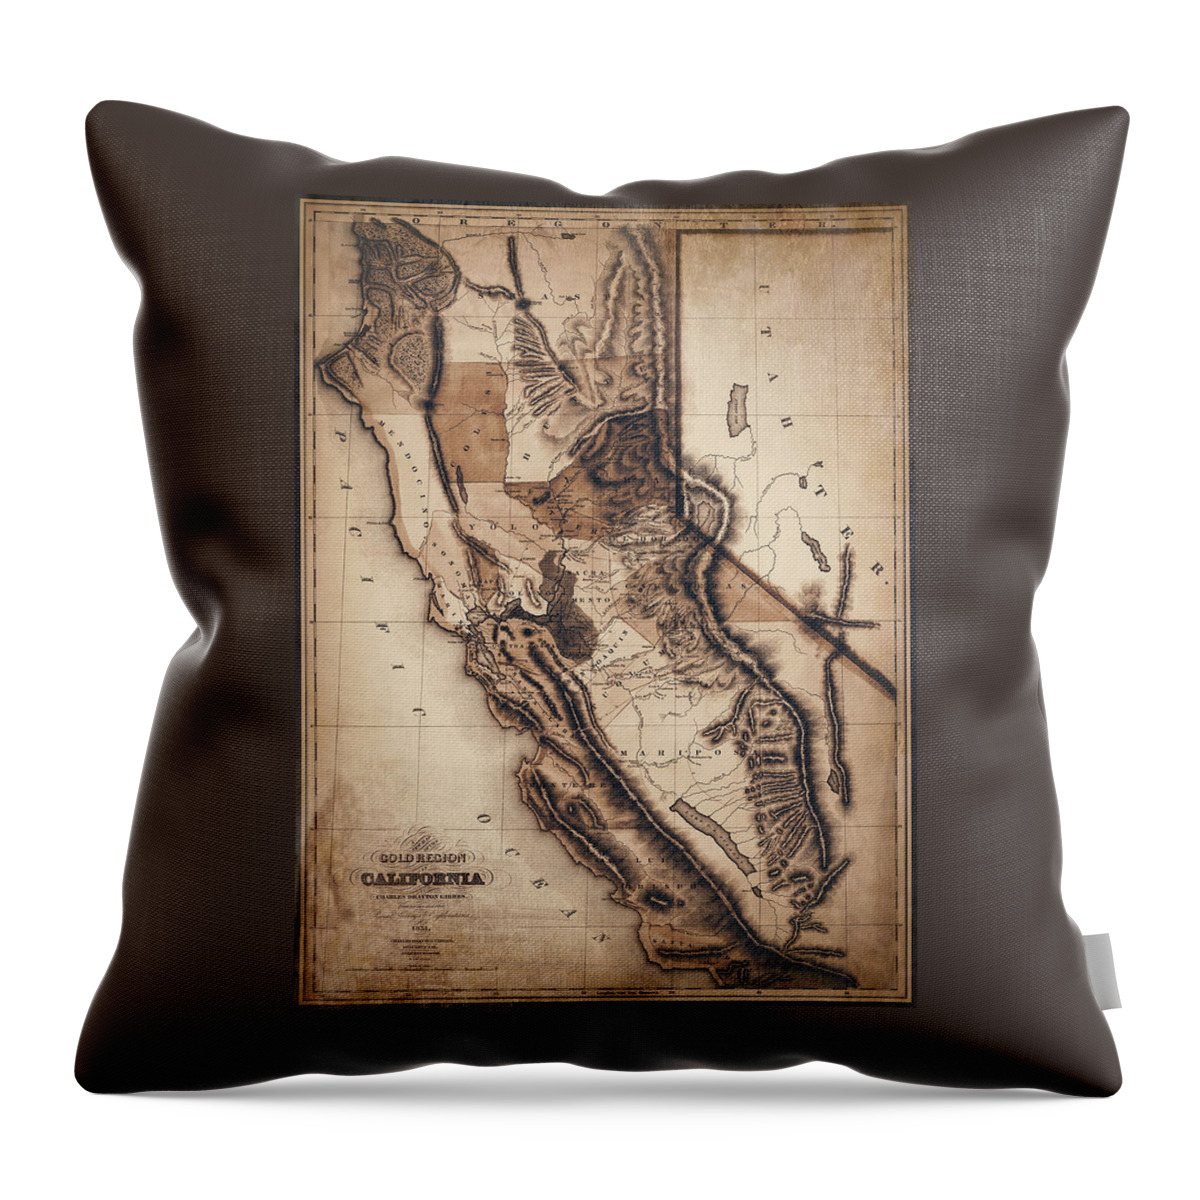 California Throw Pillow featuring the photograph California Gold Region Vintage Map 1851 Sepia by Carol Japp